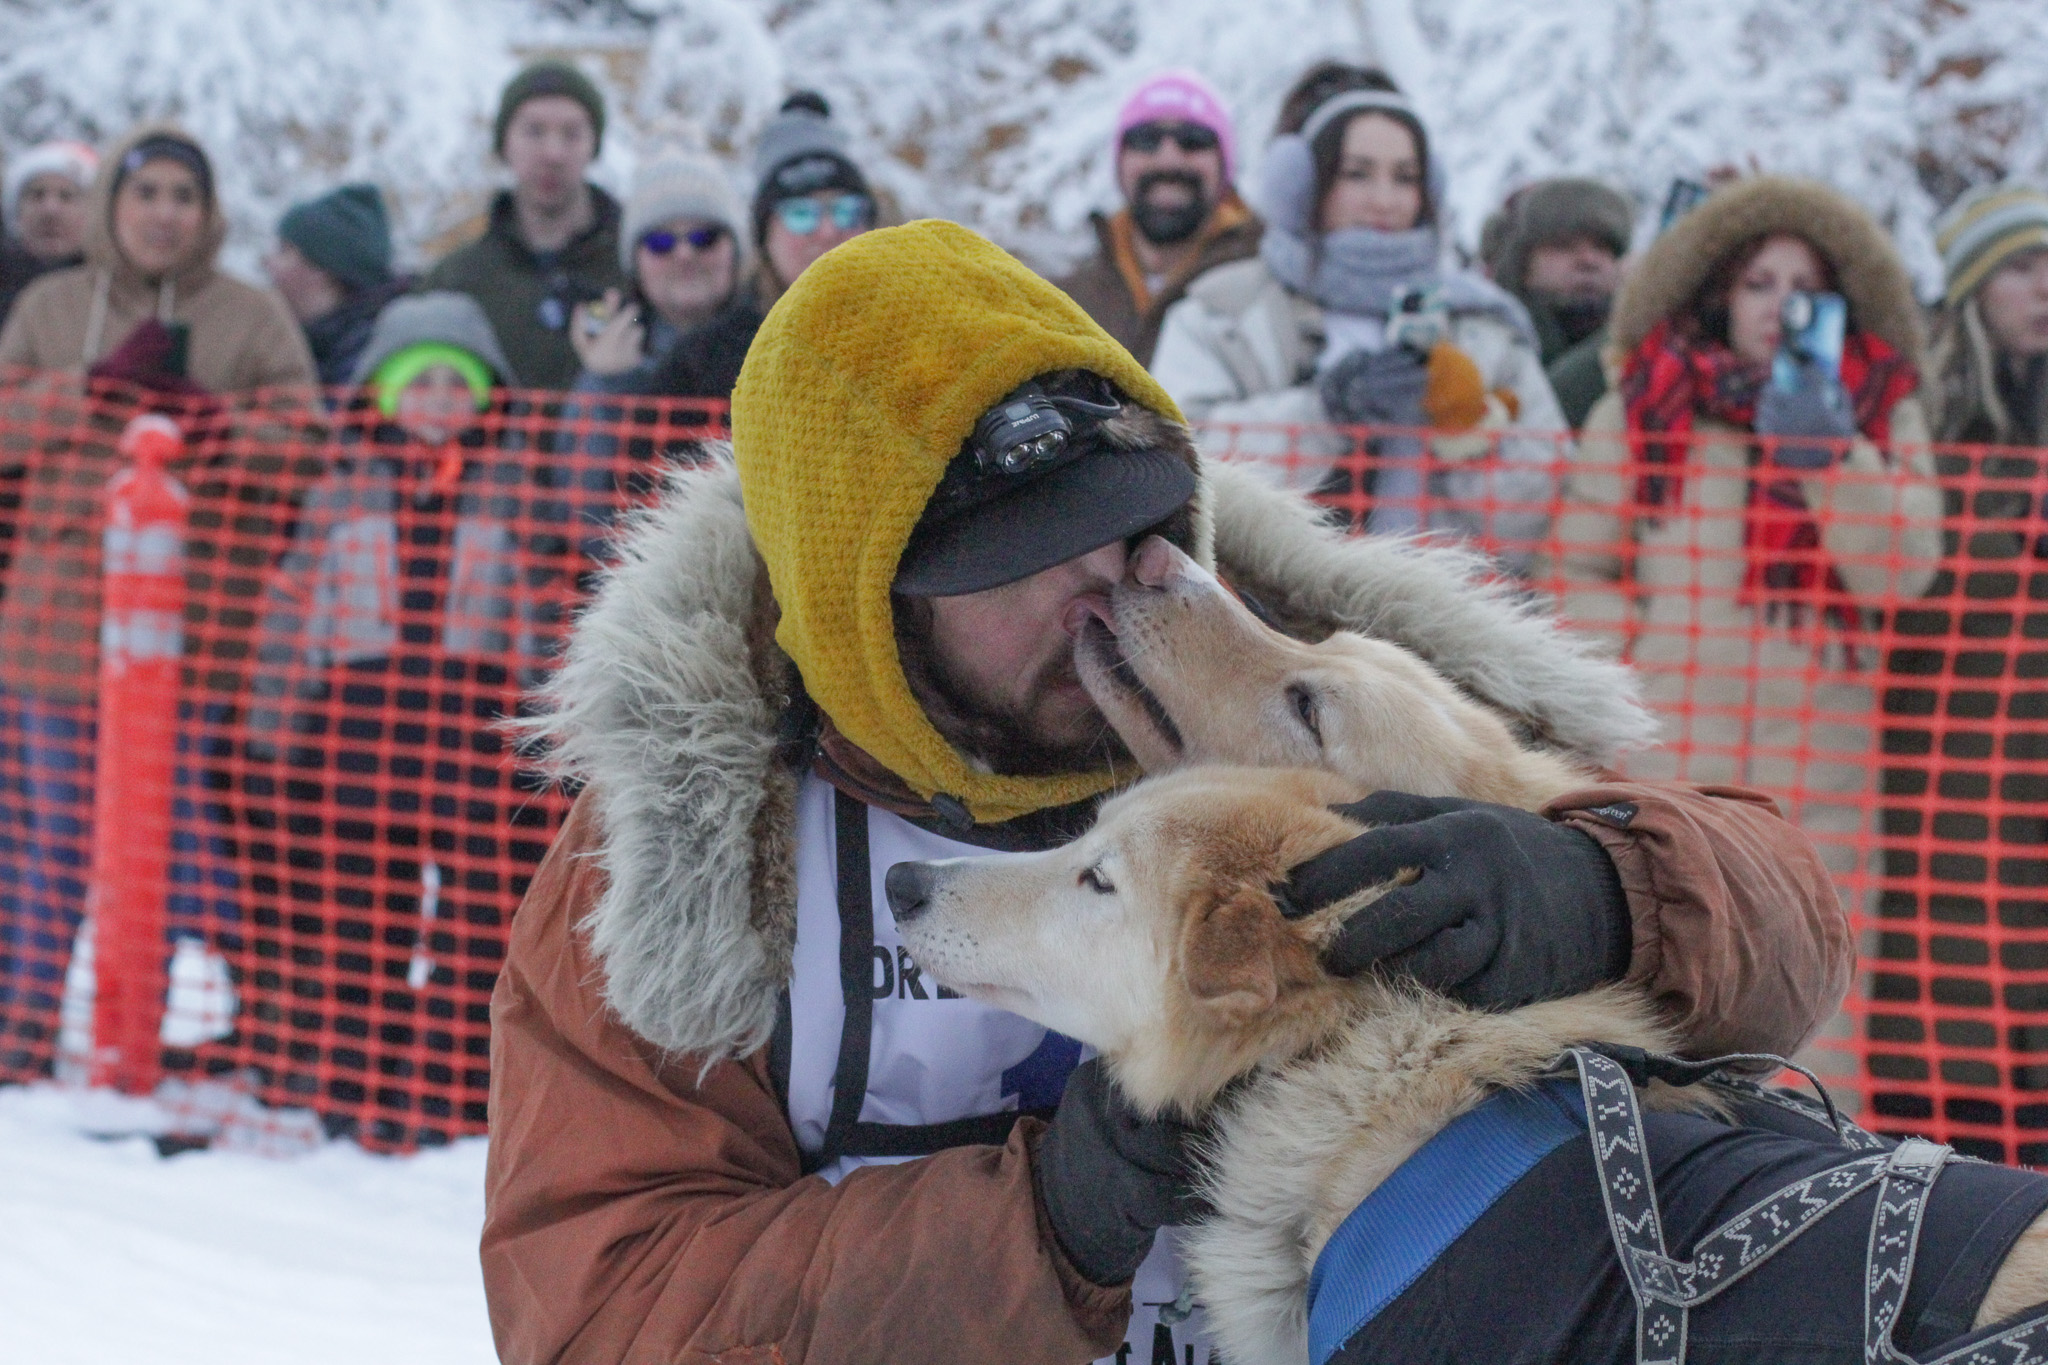 A dog licks a mushers face as a crowd watches from behind some orange plastic encing